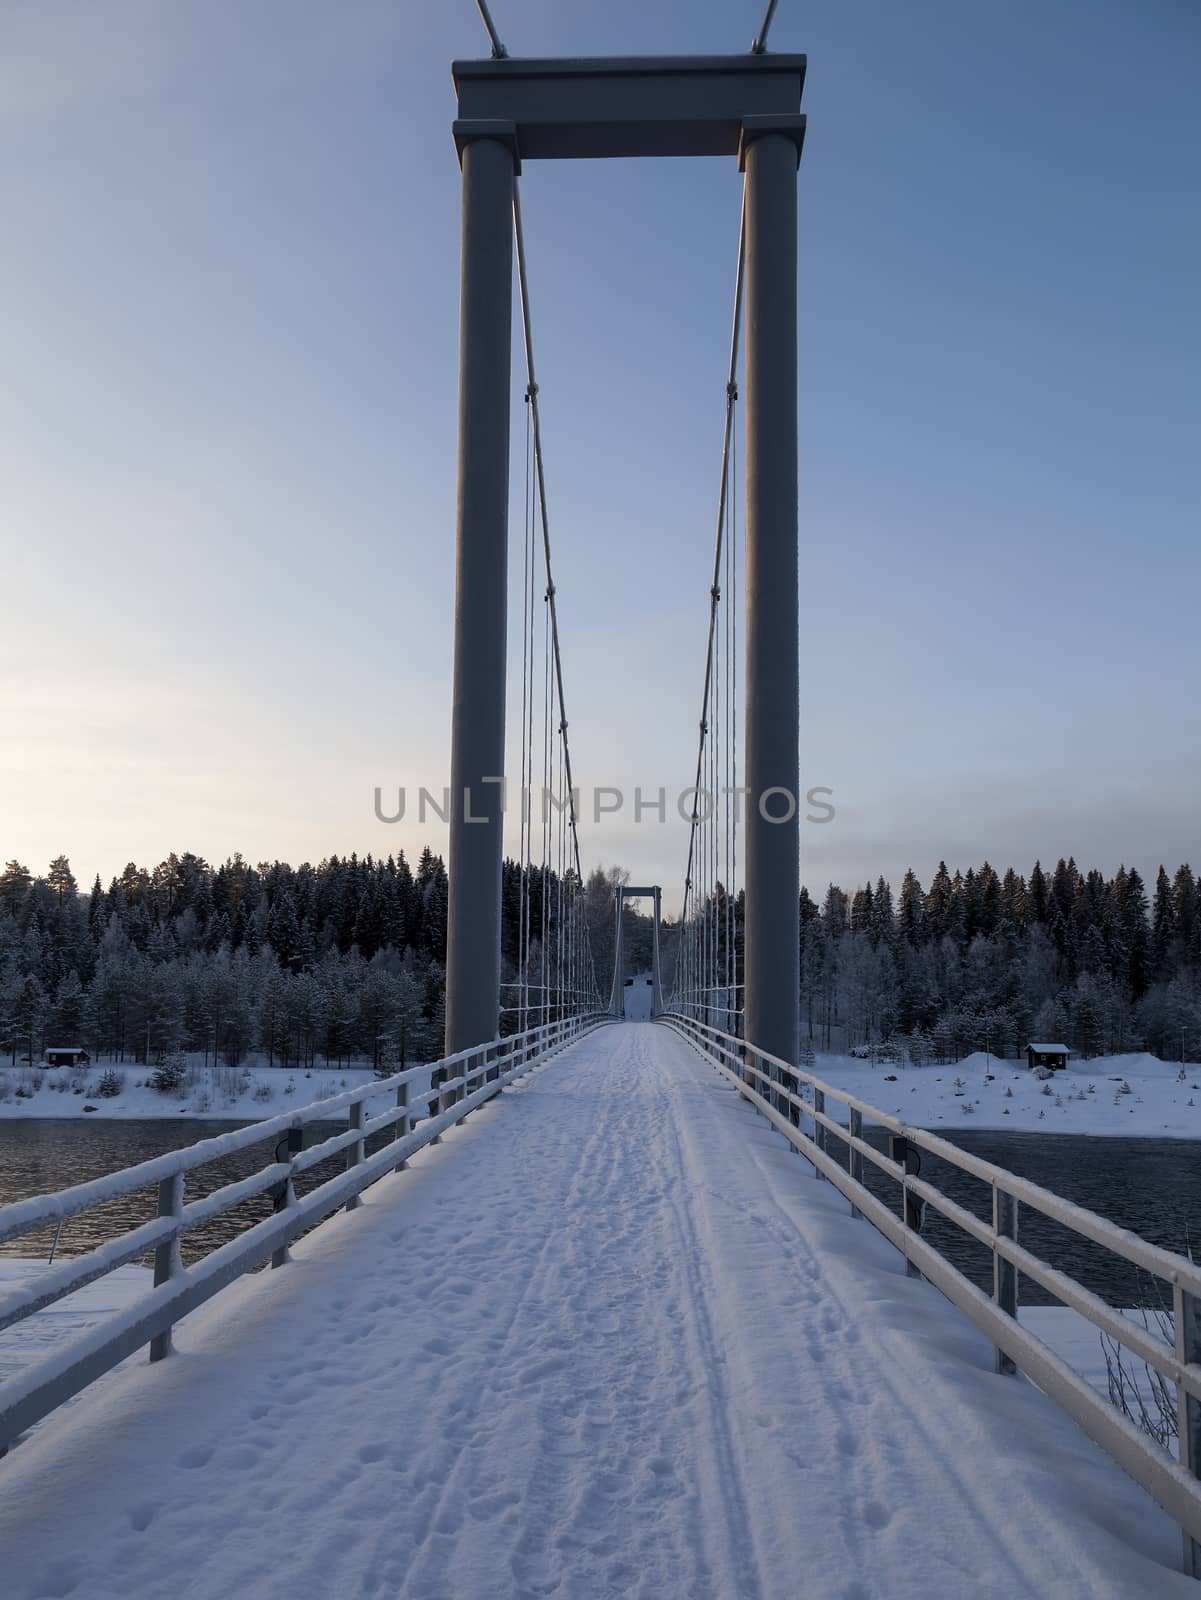 A bridge from a closer perspective in a winter landscape